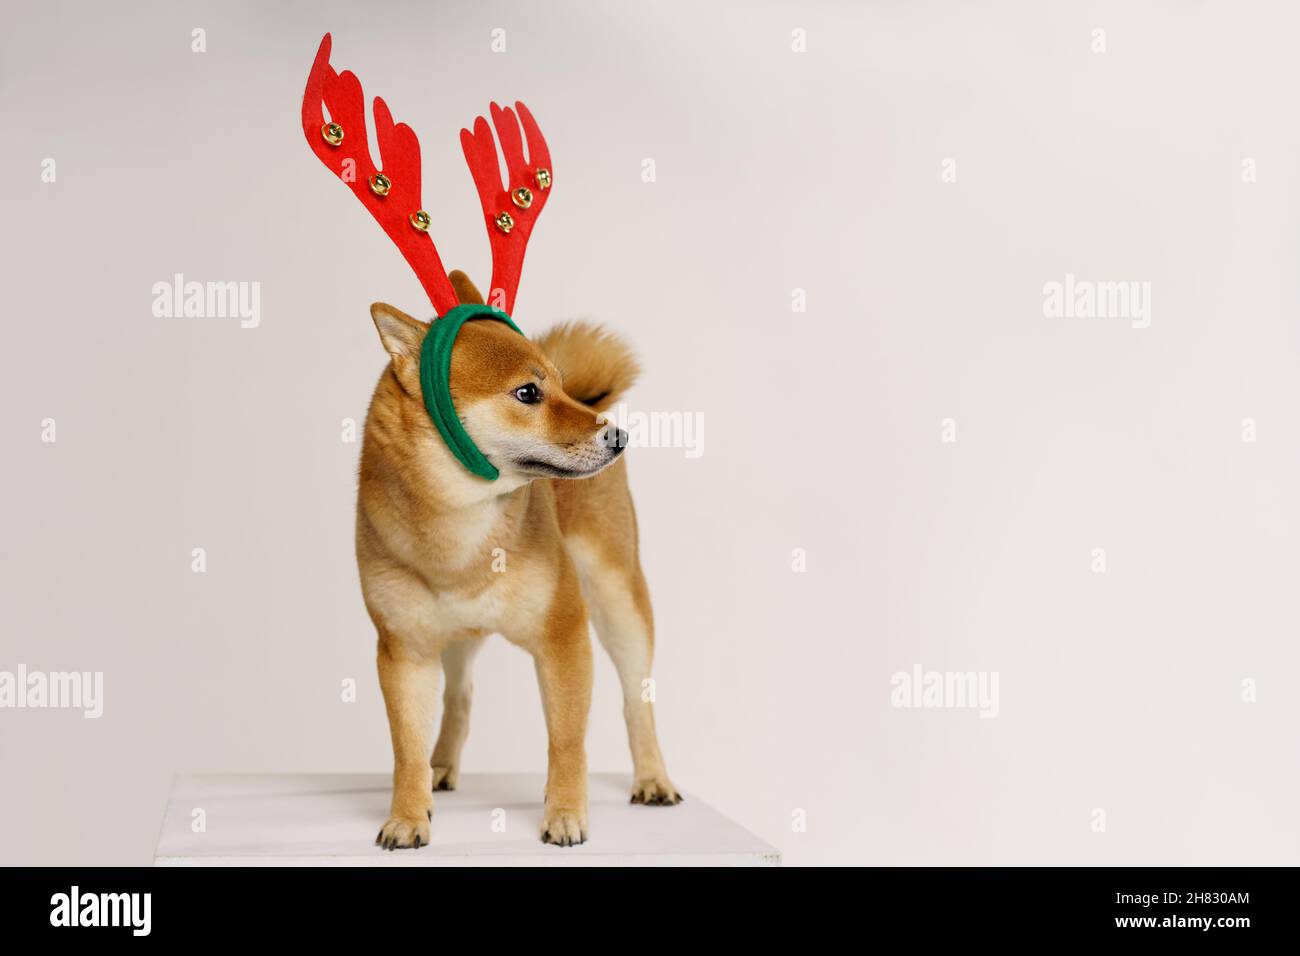 New year christmas dog breed red bow antlers light background isolate red with white. Pet for christmas Stock Photo